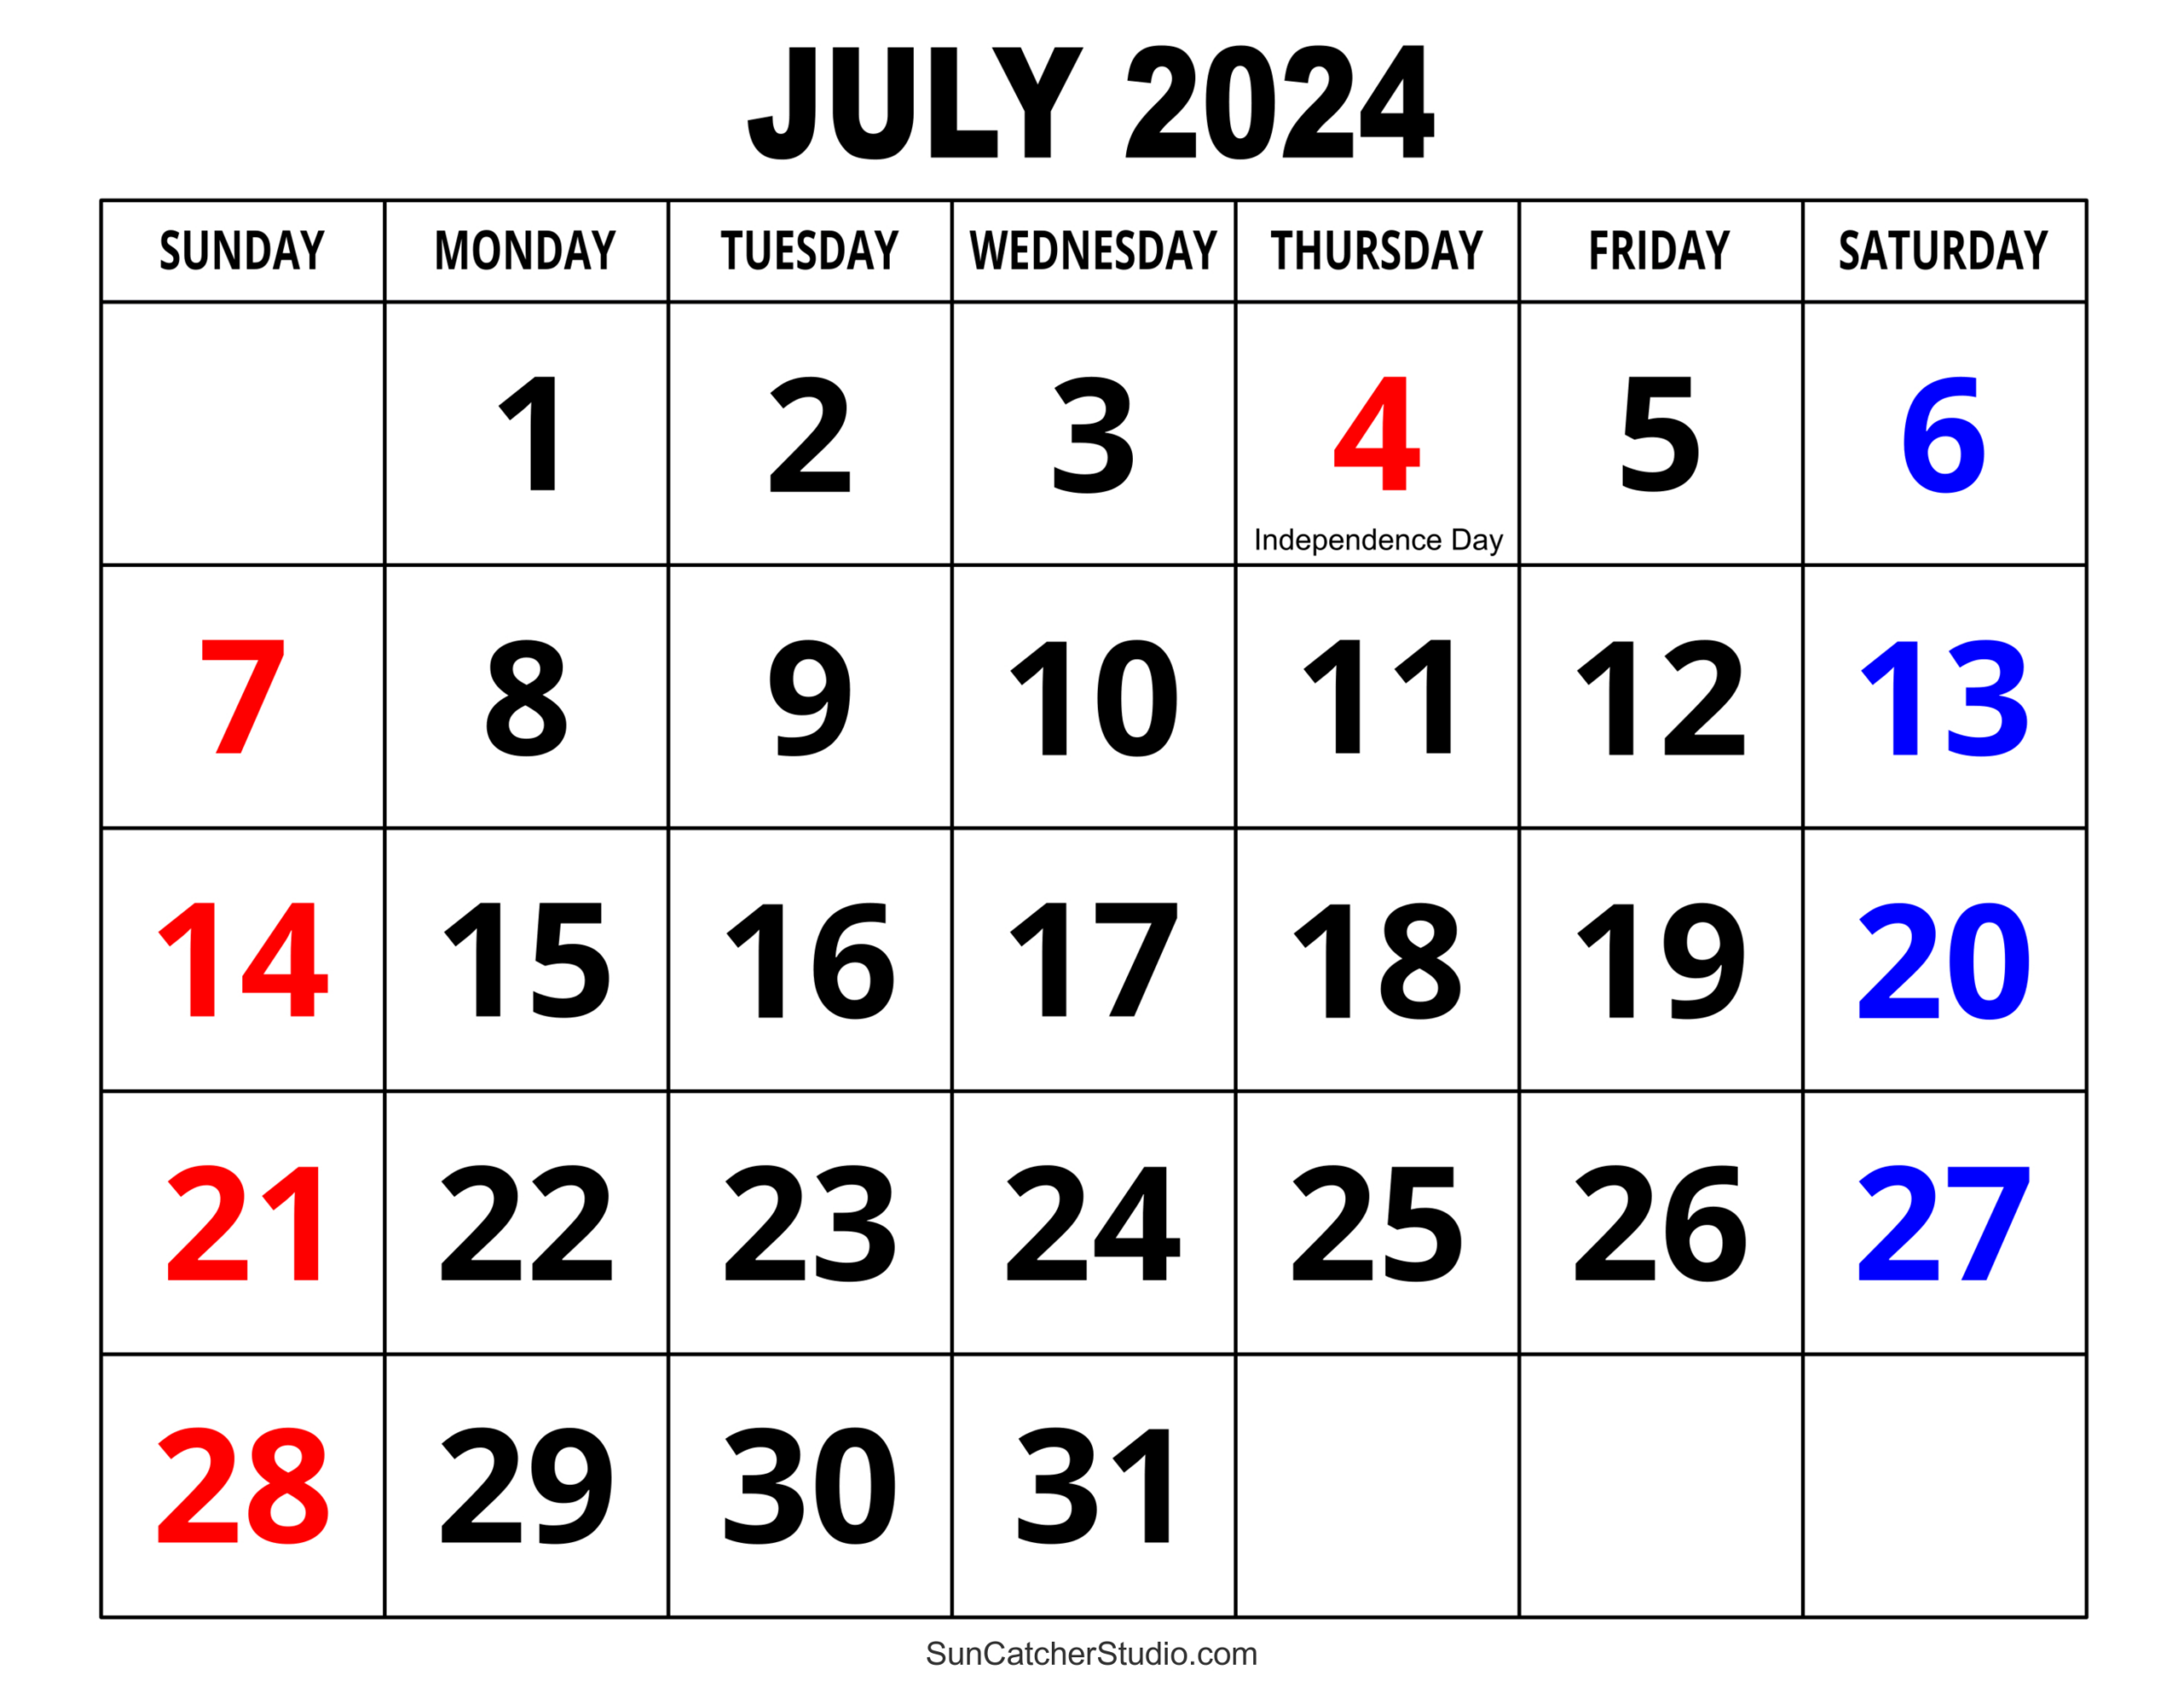 July 2024 Calendar (Free Printable) – Diy Projects, Patterns | 29 July 2024 Calendar Printable